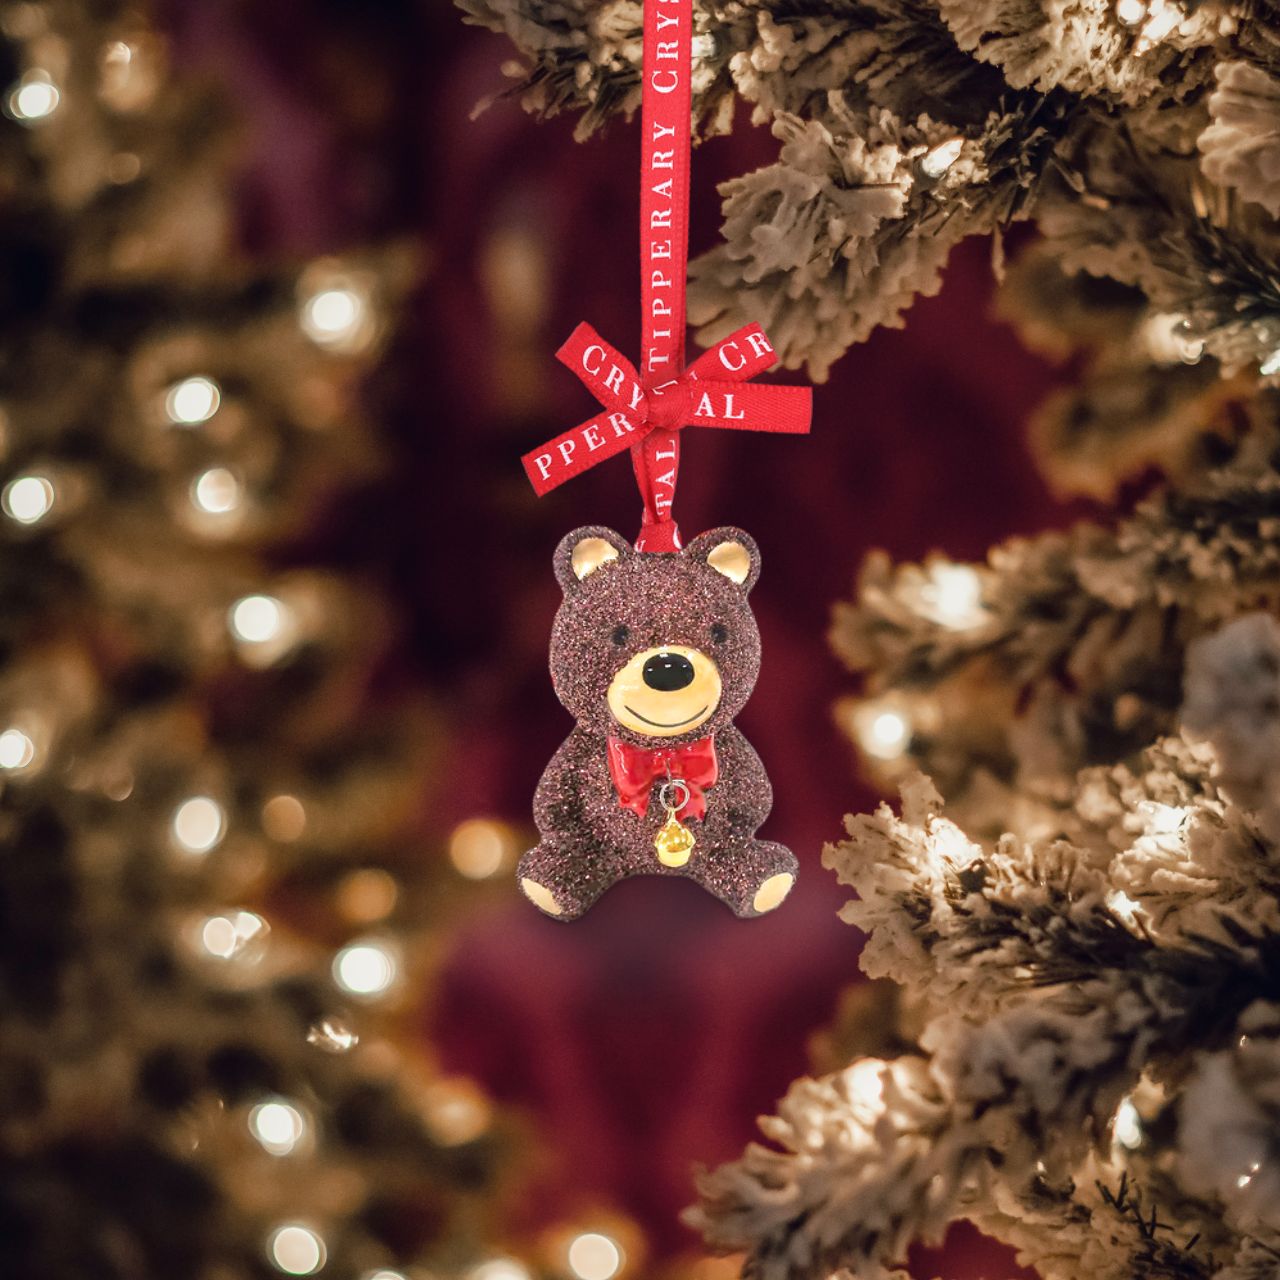 Porcelain Decoration - Teddy Bear Christmas Ornament - NEW 2022  We just Love Christmas! The festive season, the giving of gifts, creating memories and being together with family and loved ones. Have lots of fun with our lovingly designed and created Christmas decorations, each one has a magic sparkle of elf dust